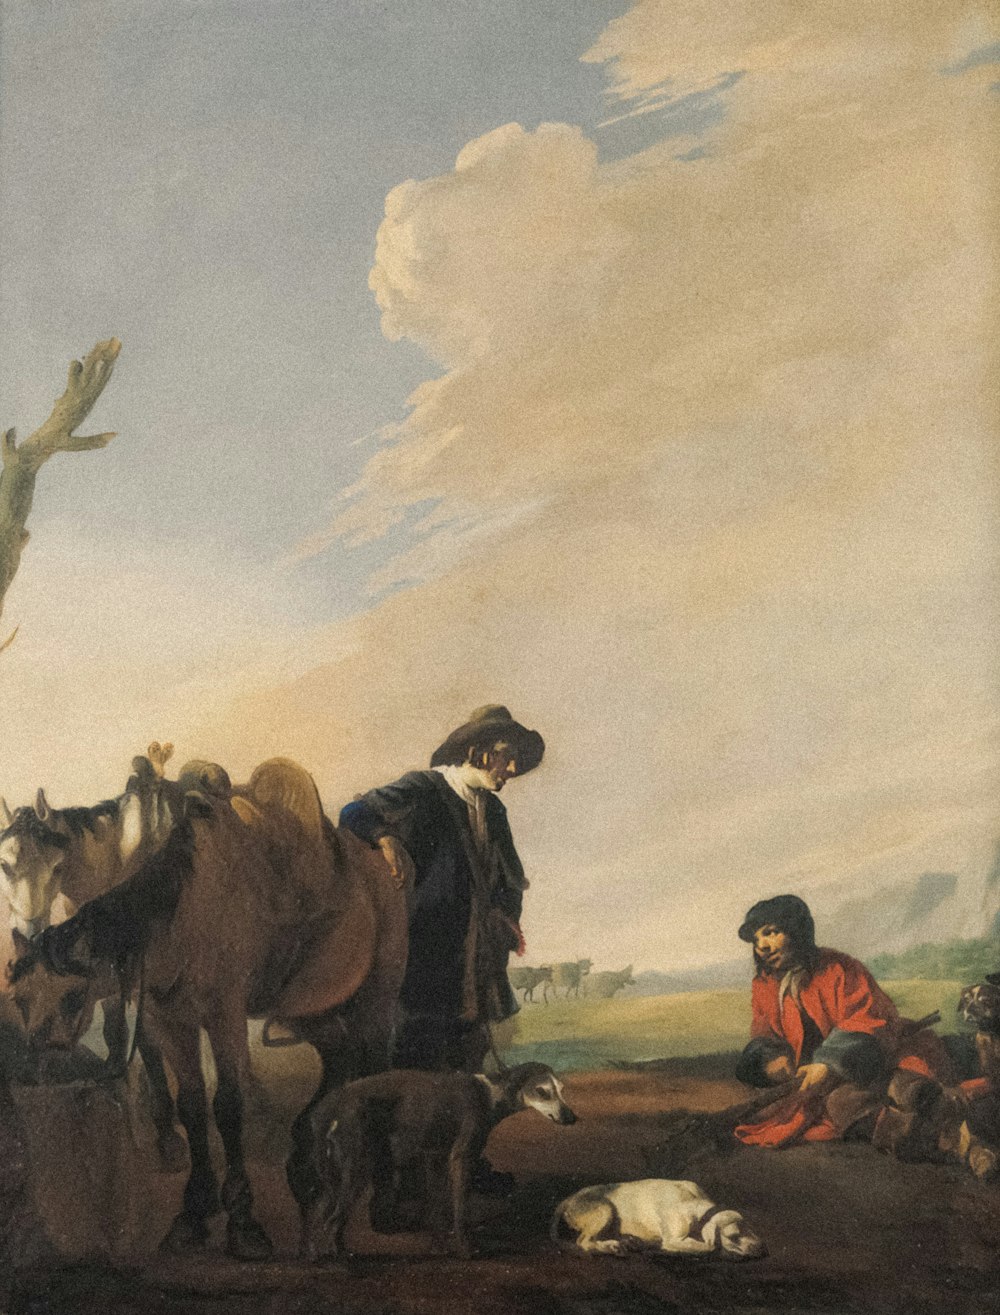 a painting of a man sitting on a horse next to a dog